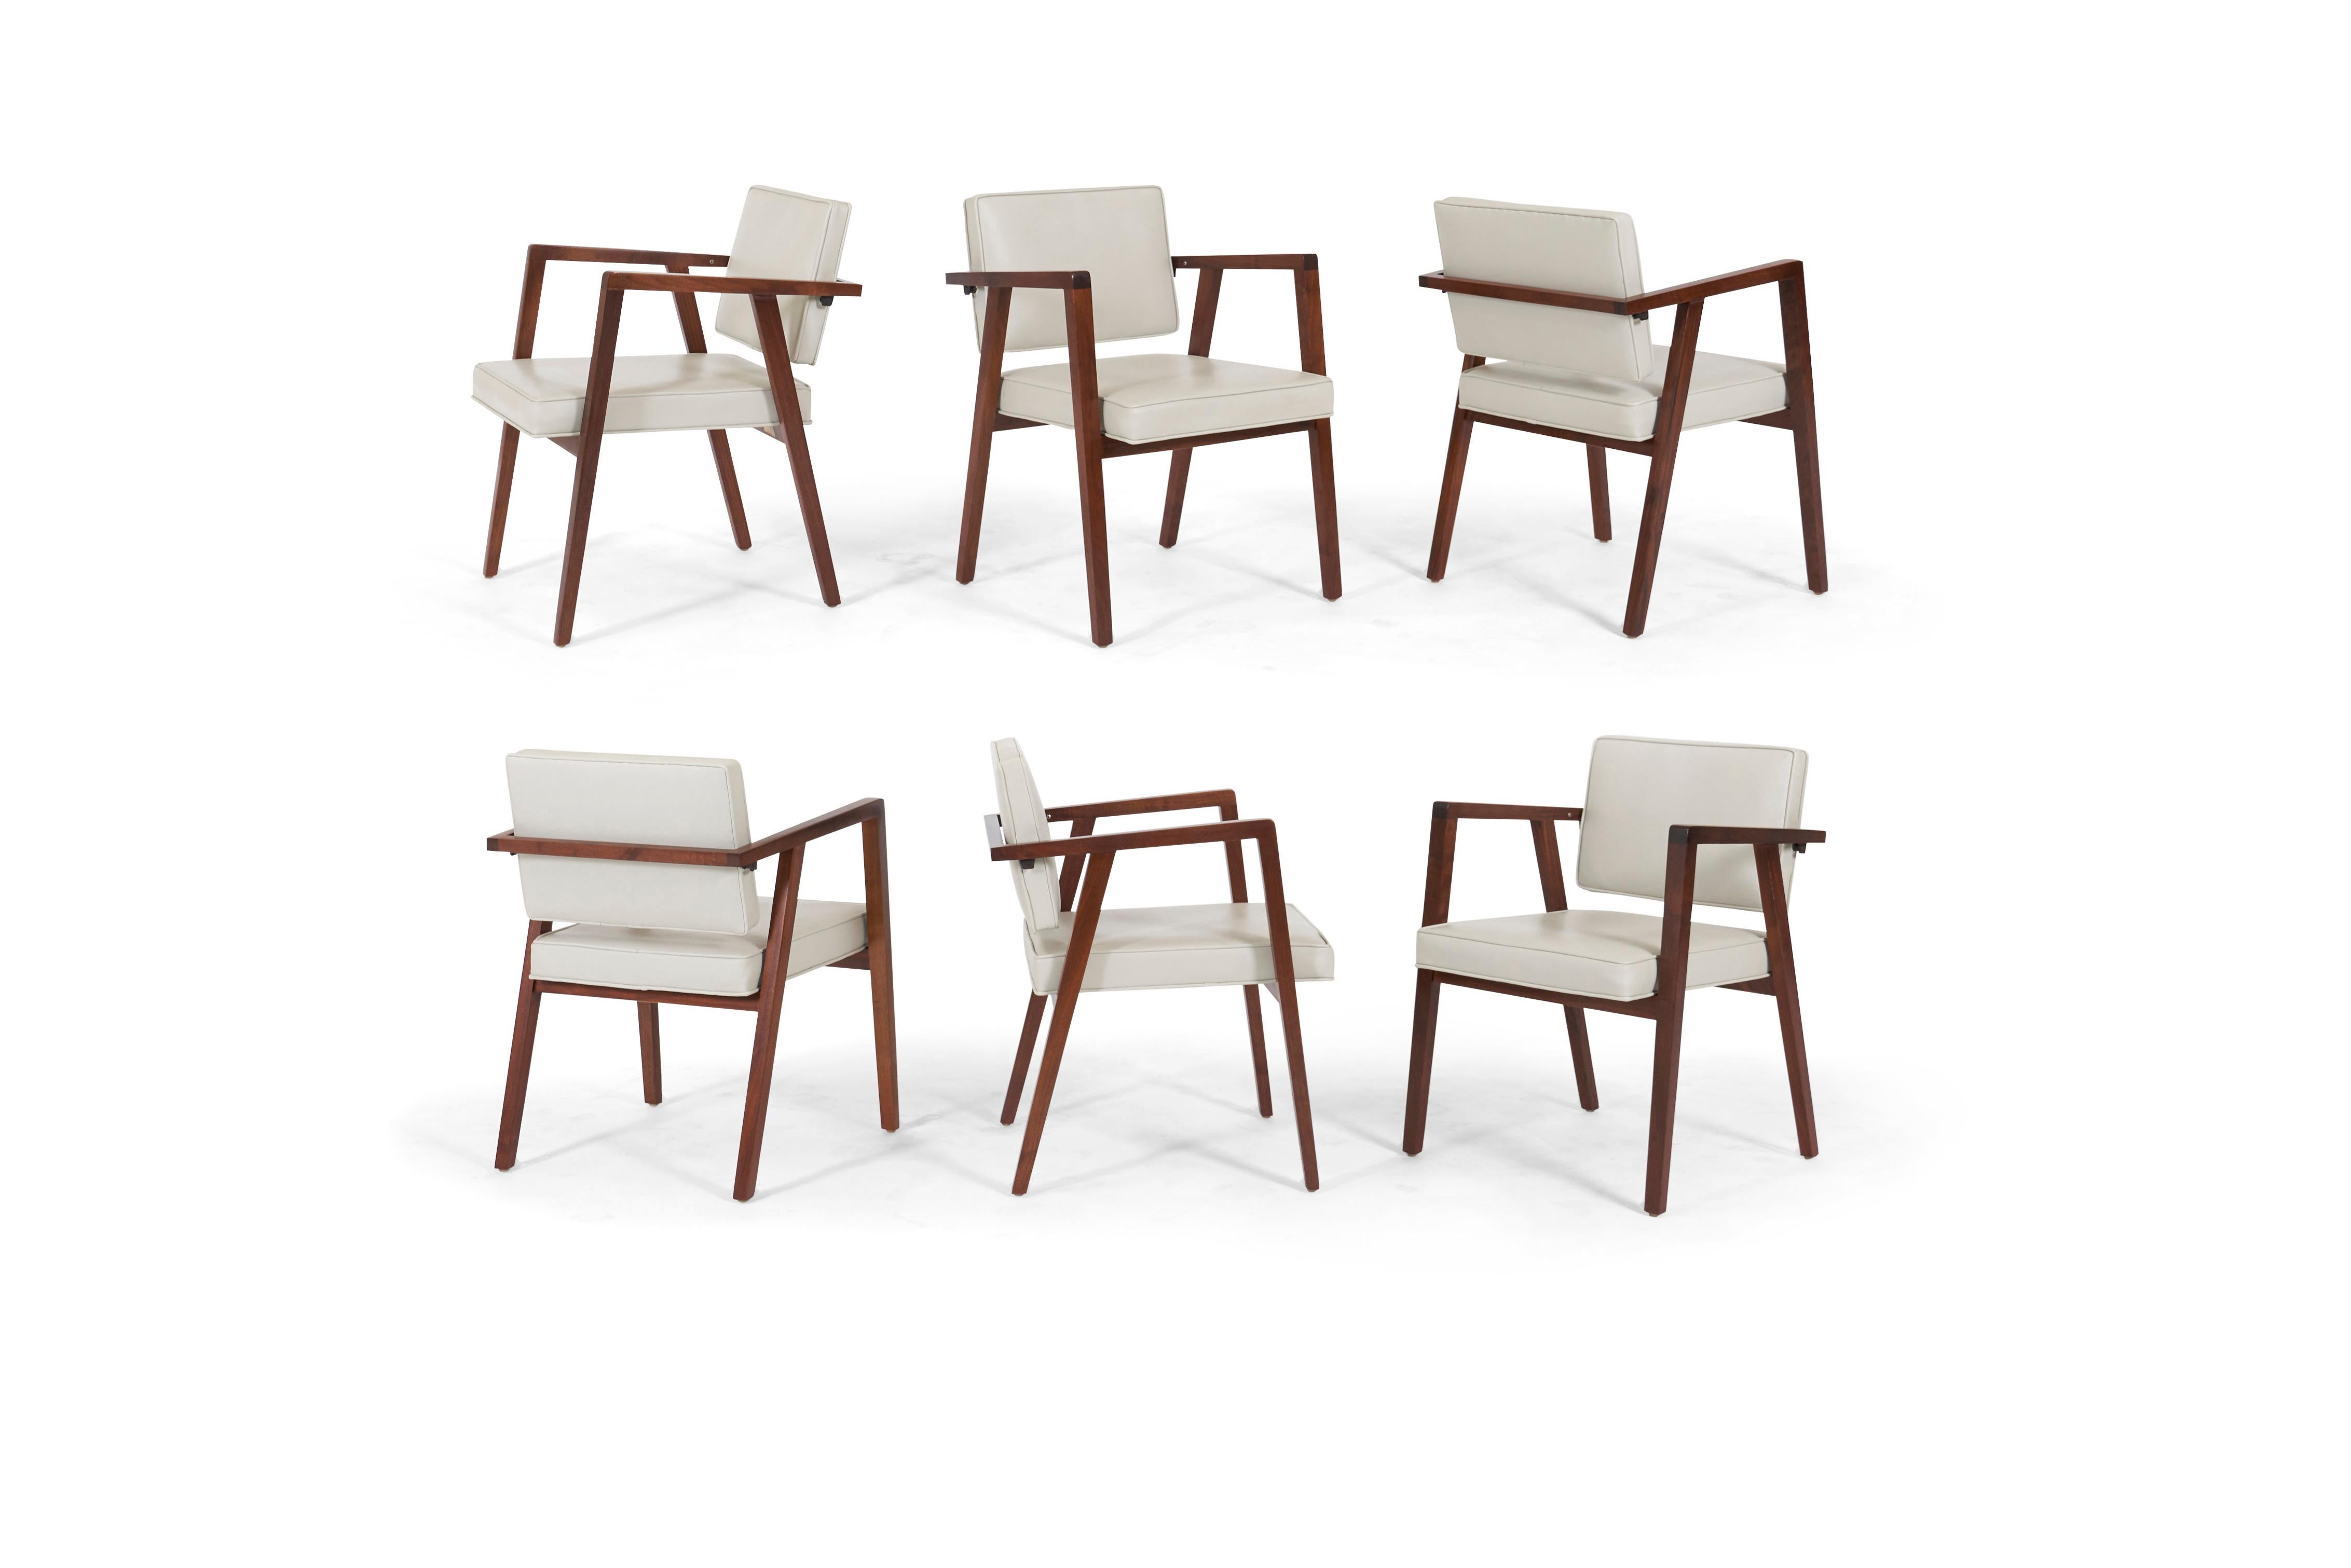 Set of 6 Franco Albini dining chairs. Produced by Knoll in 1952. Frames have been refinished, original upholstery in excellent shape.